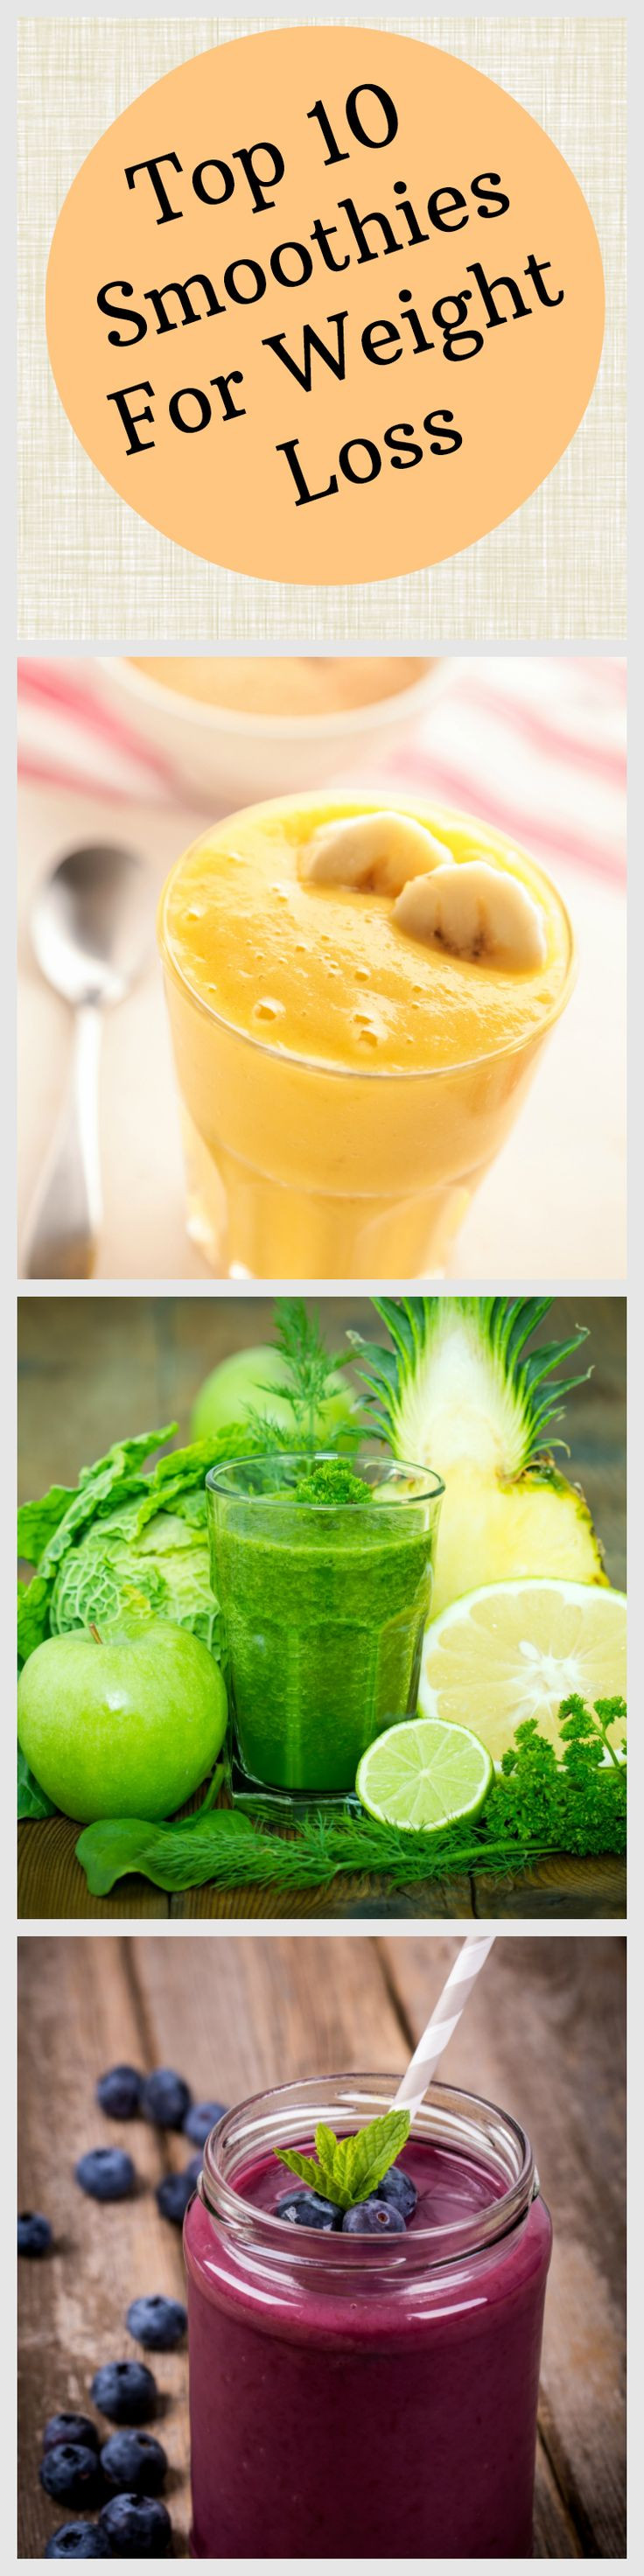 Best Morning Smoothies For Weight Loss
 Nutribullet smoothies